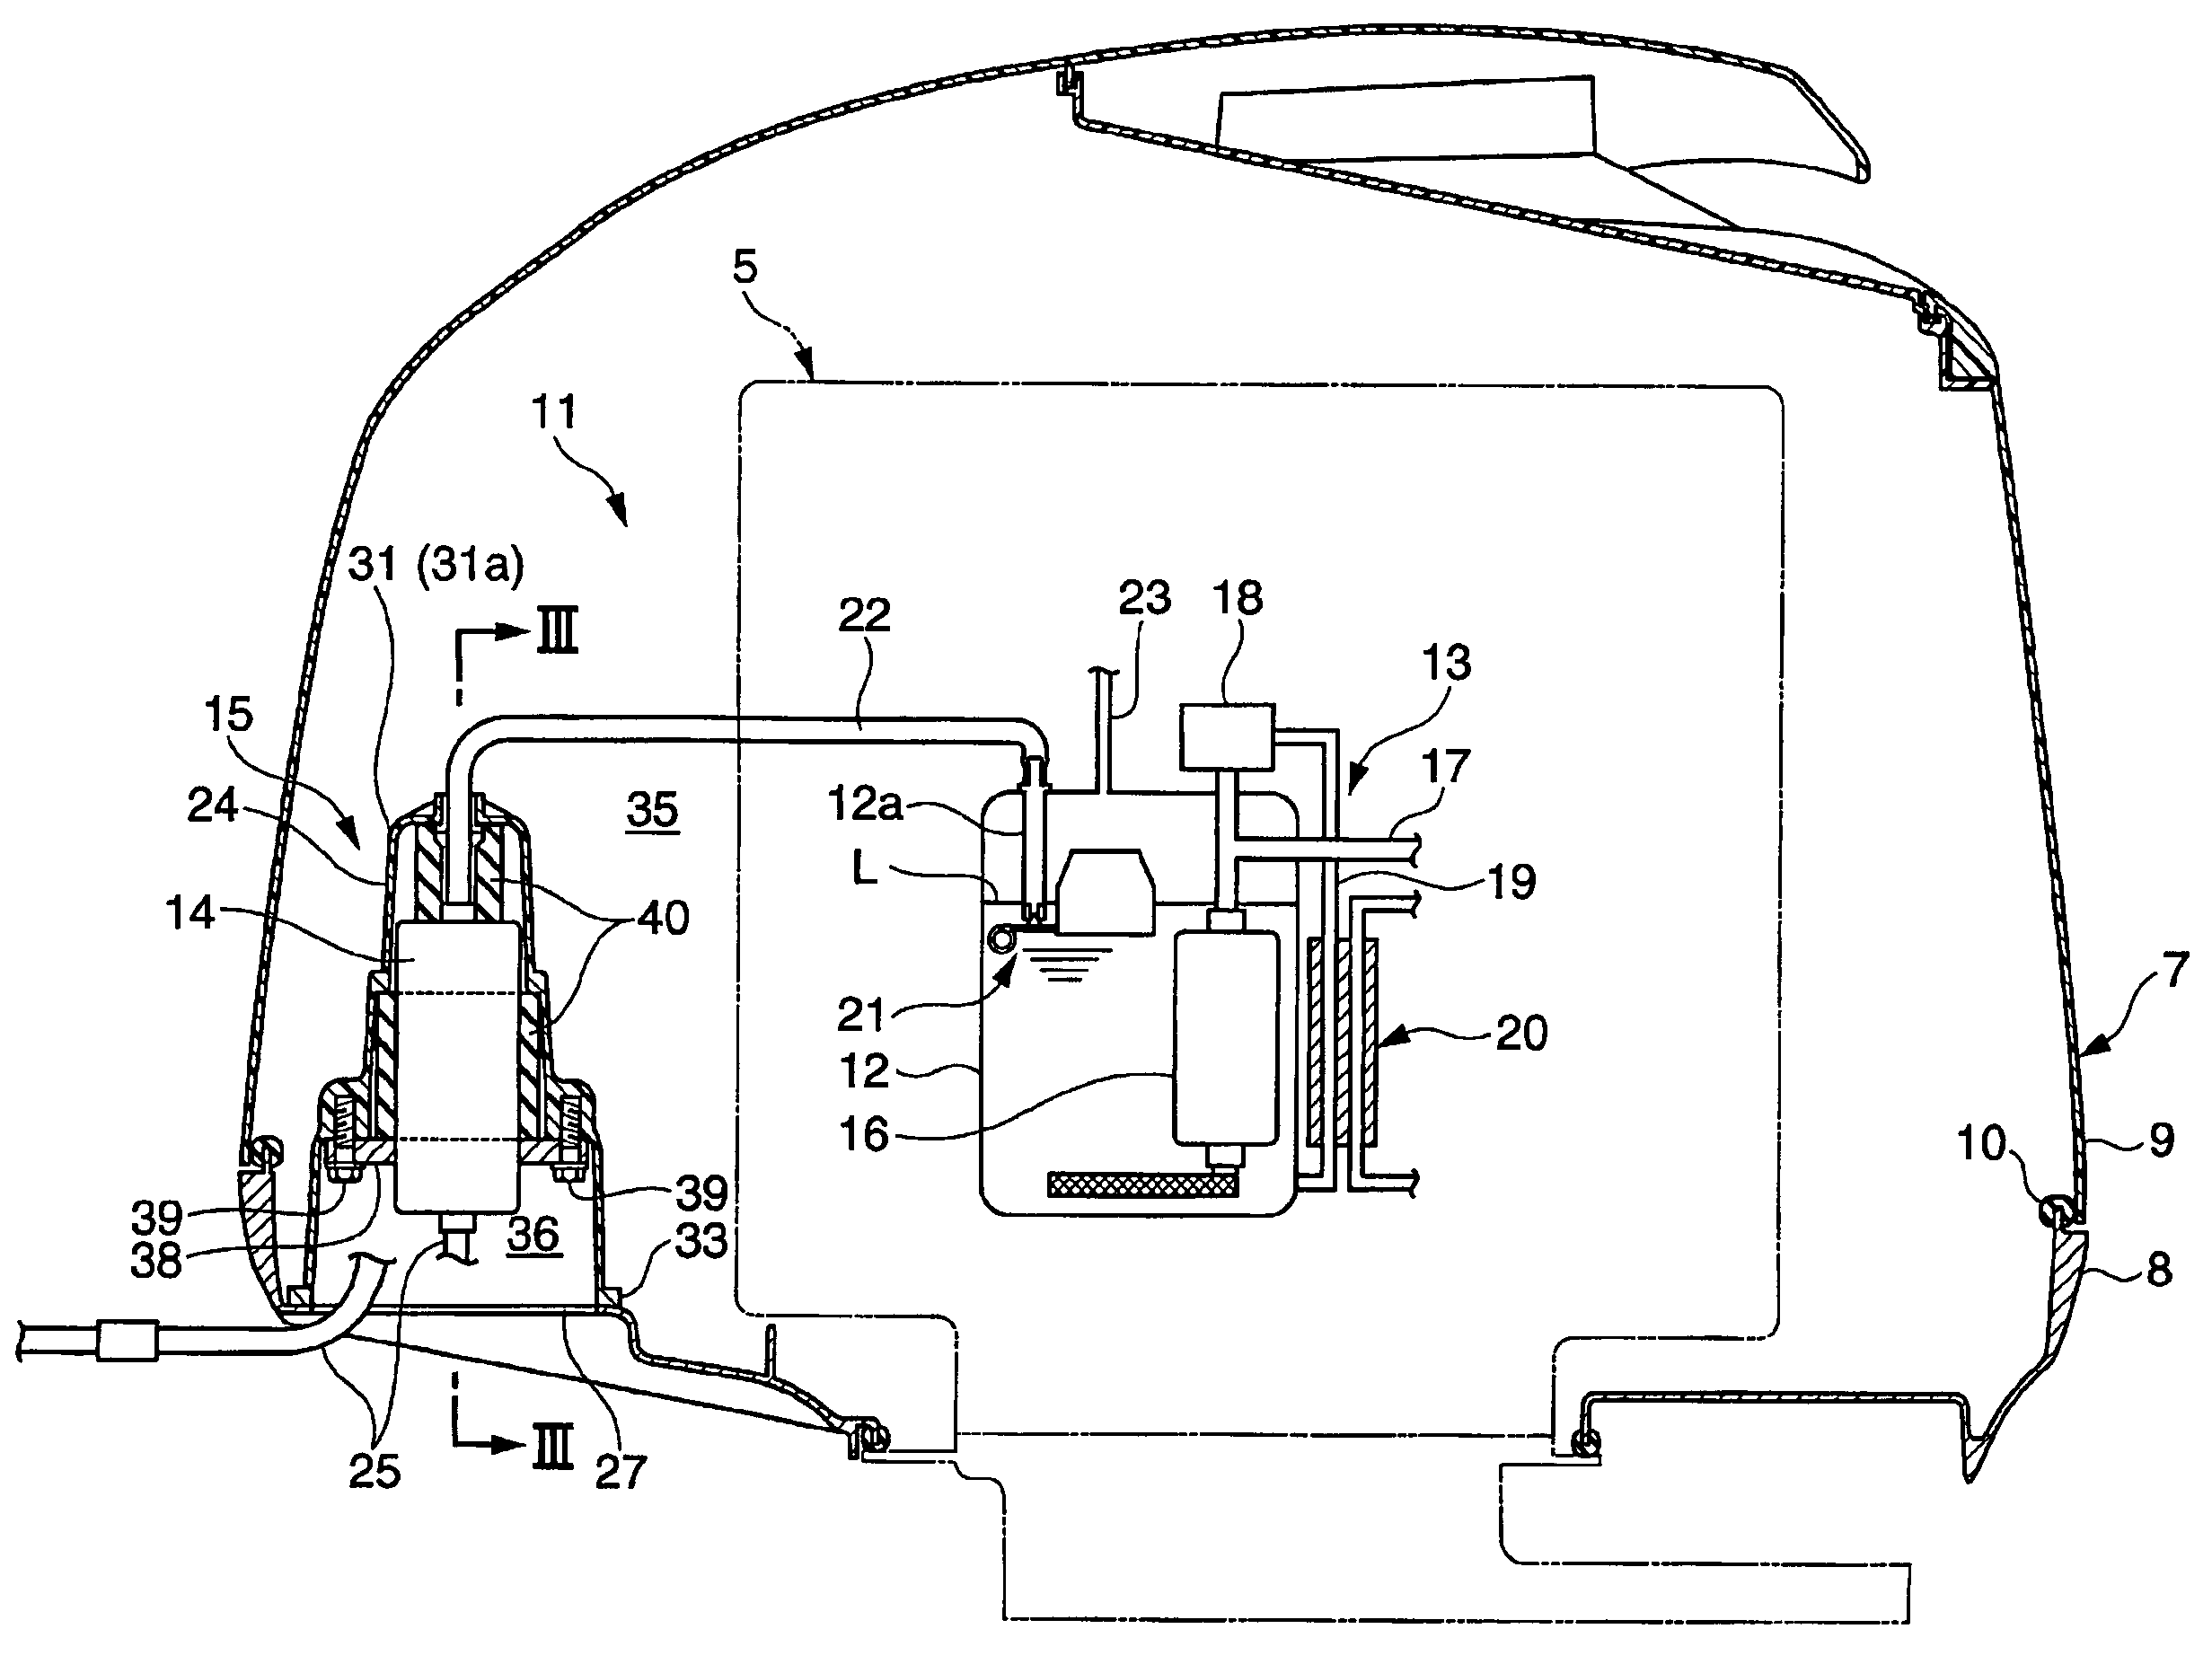 Outboard motor with forward air intake and air-cooled fuel pump